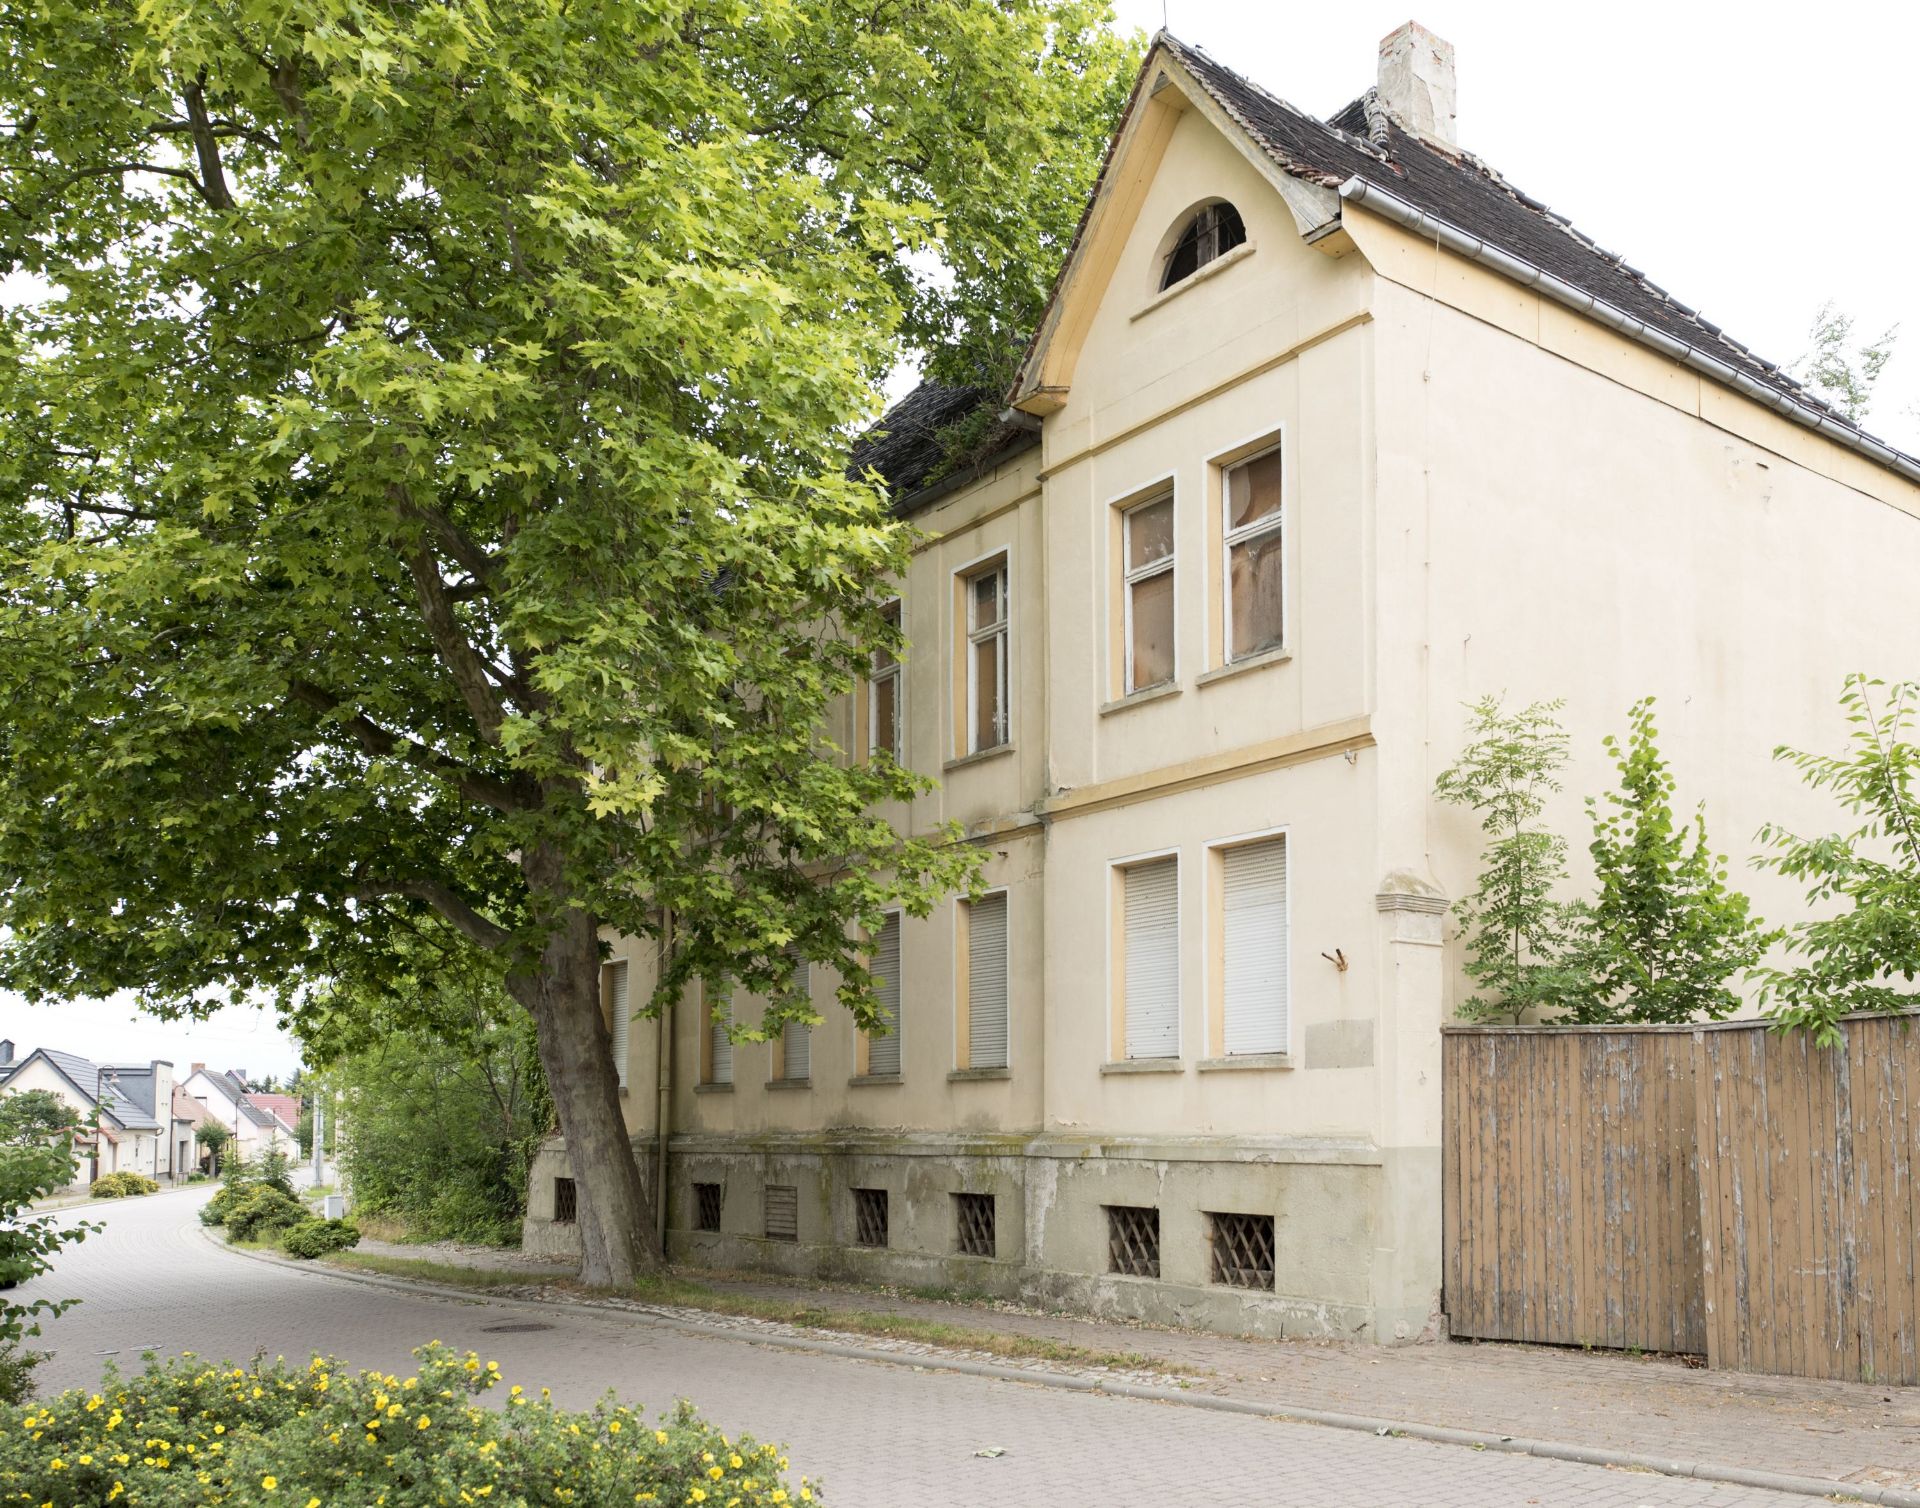 Multi Apartment Large Mansion With 1200m2 Internal Floor Space & 3,330m2 Land In Zuchau, Germany!